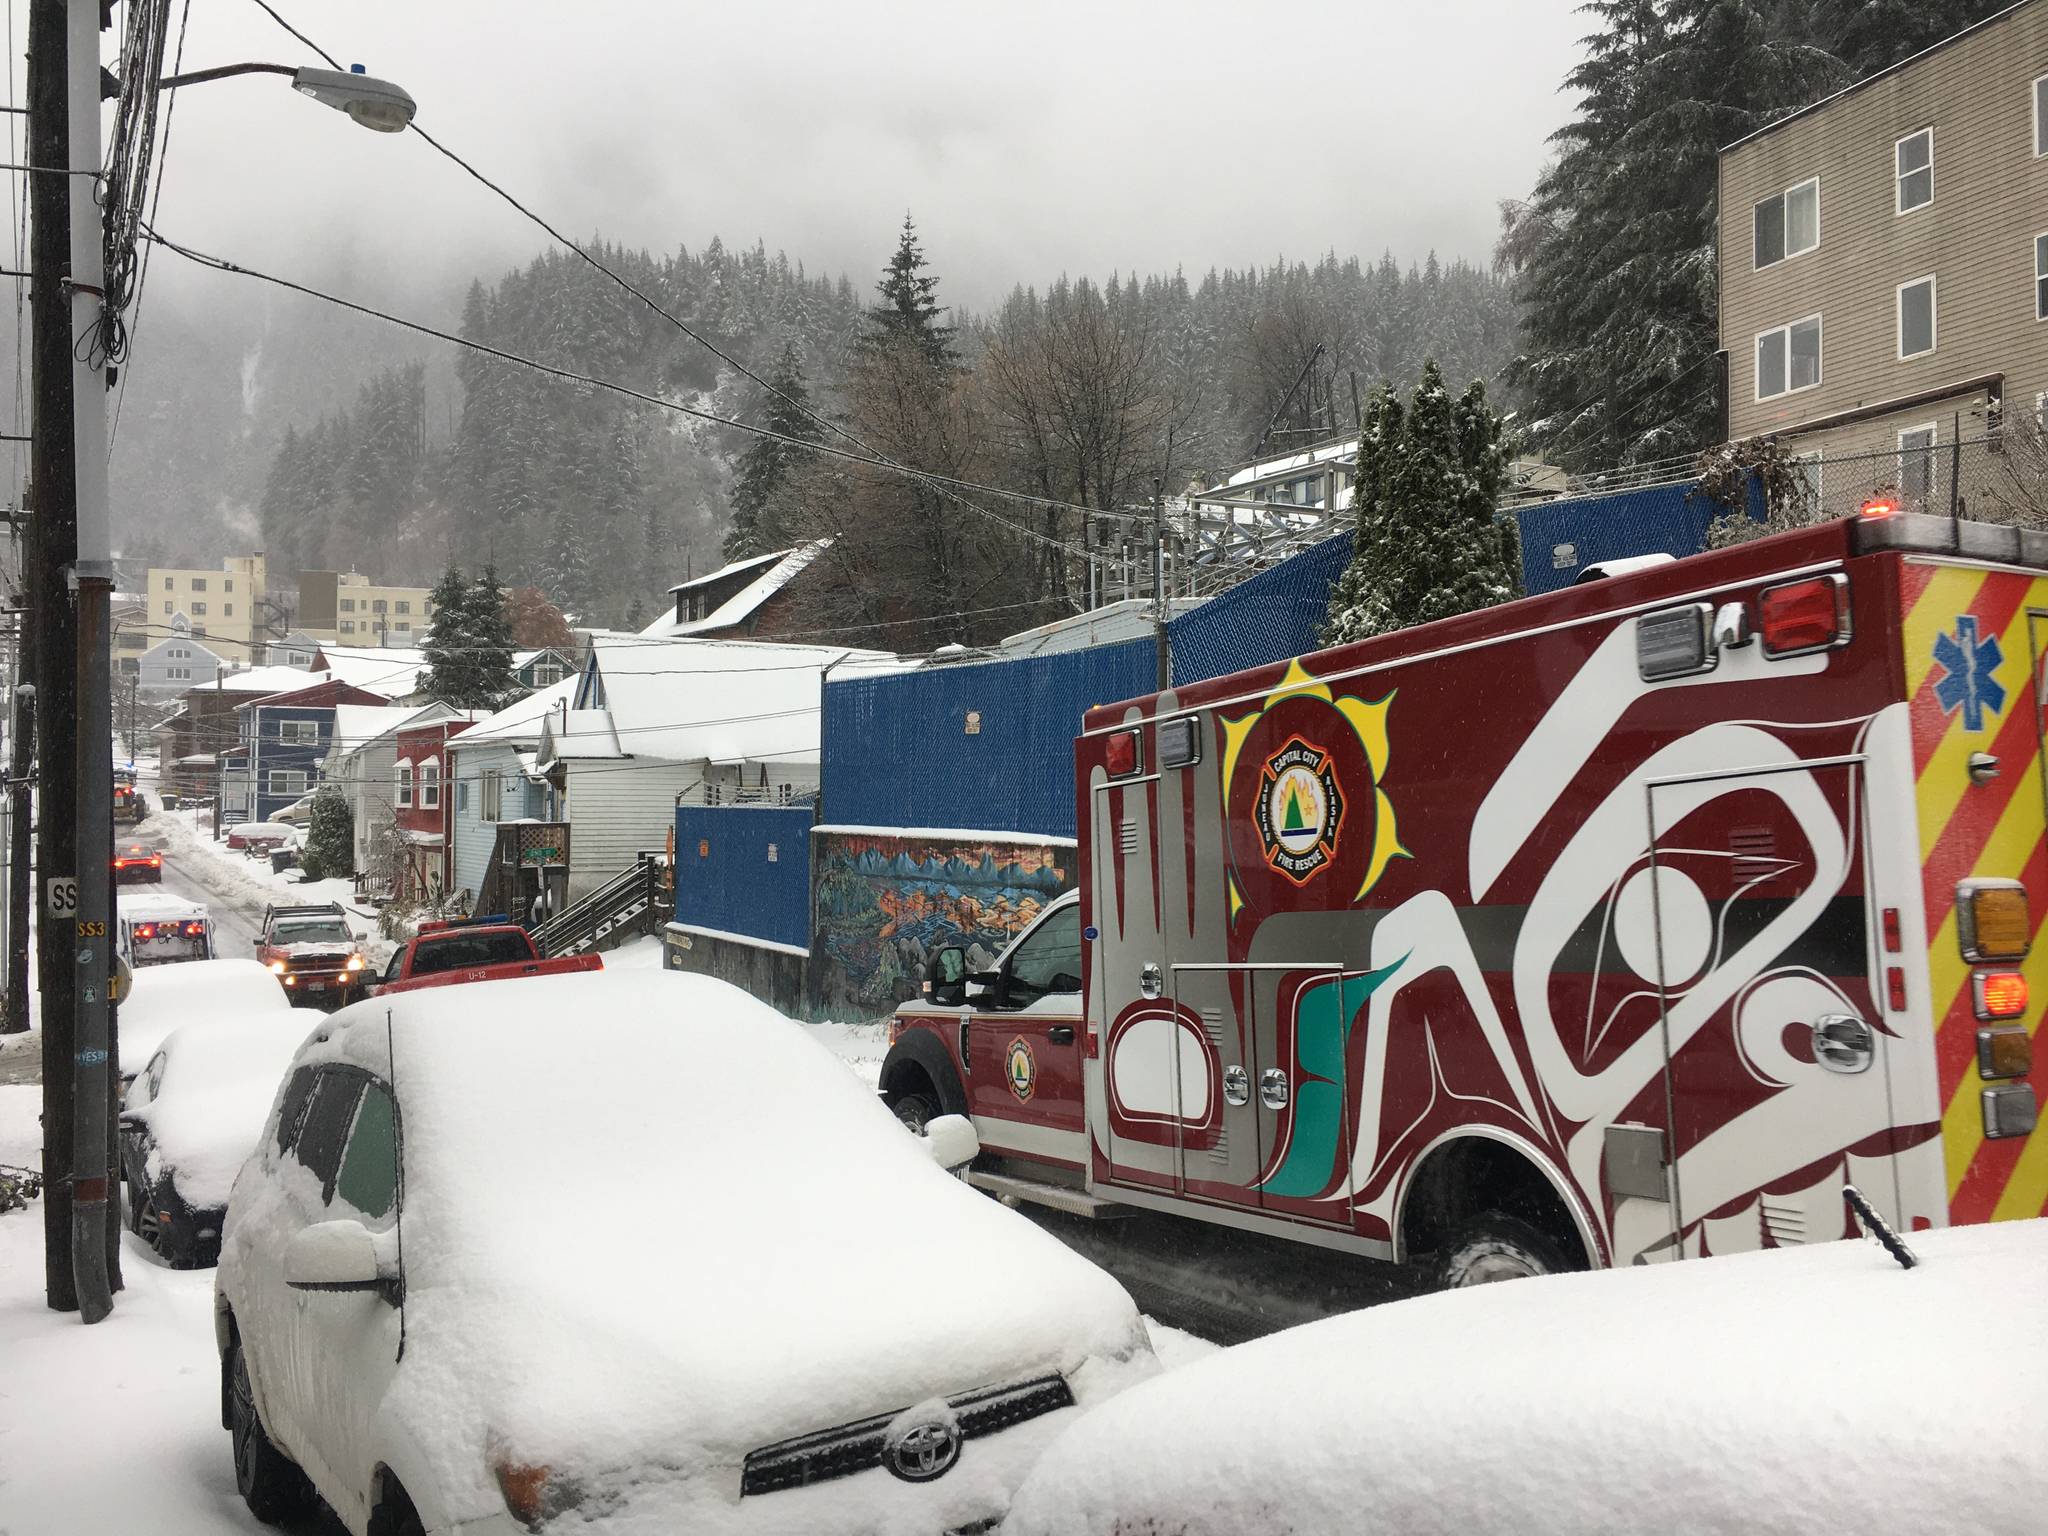 A Capital City Fire/Rescue truck clears the road ahead of an ambulance following a heavy winter storm on Nov. 2, 2020. (Michael S. Lockett / Juneau Empire)